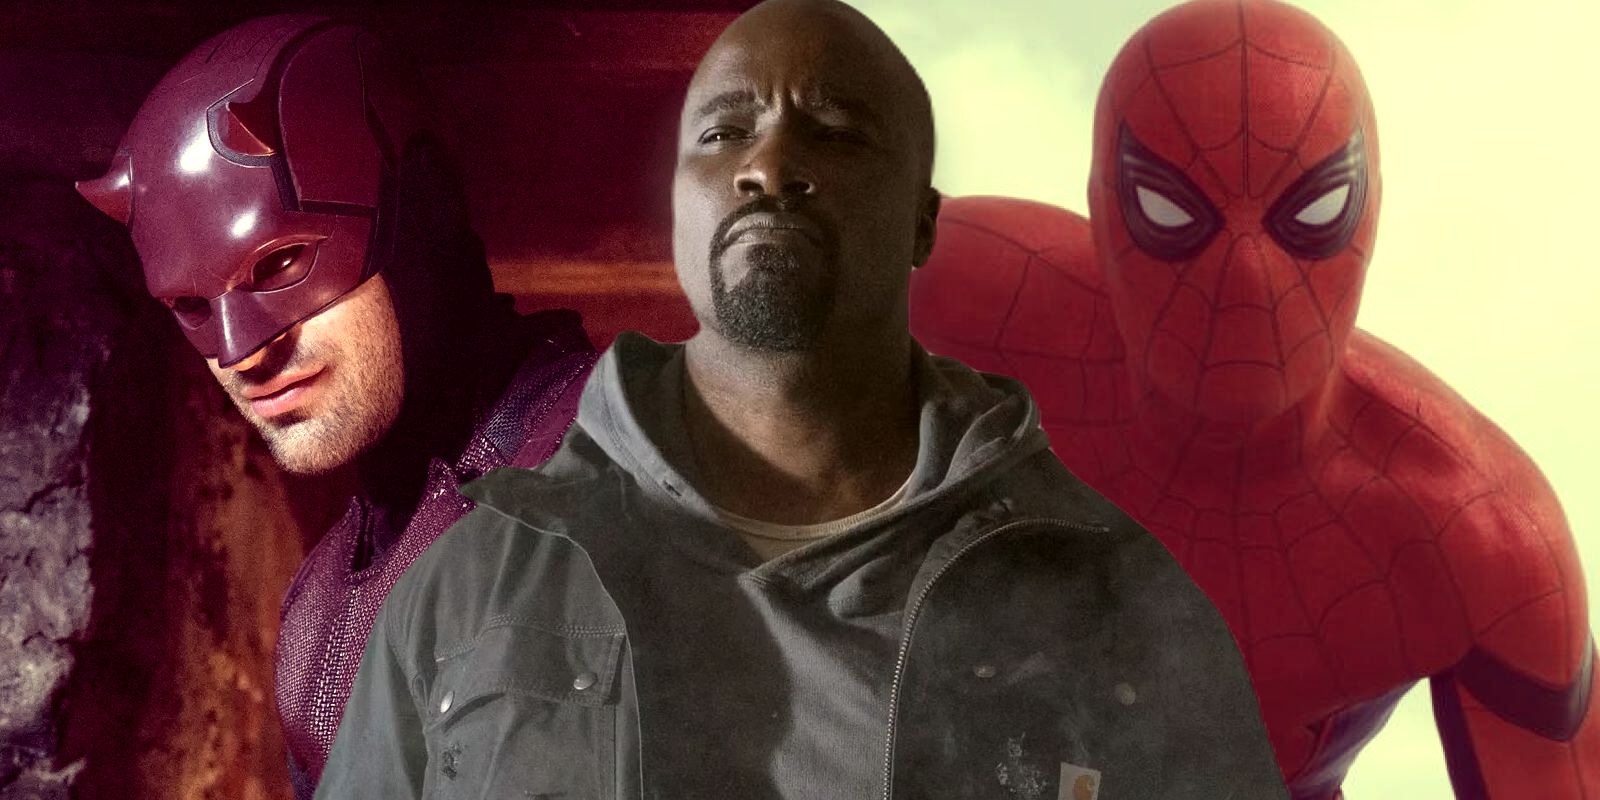 Split image of Daredevil (Charlie Cox) fully suited up, Luke Cage (Mike Colter), and Spider-Man (Tom Holland)